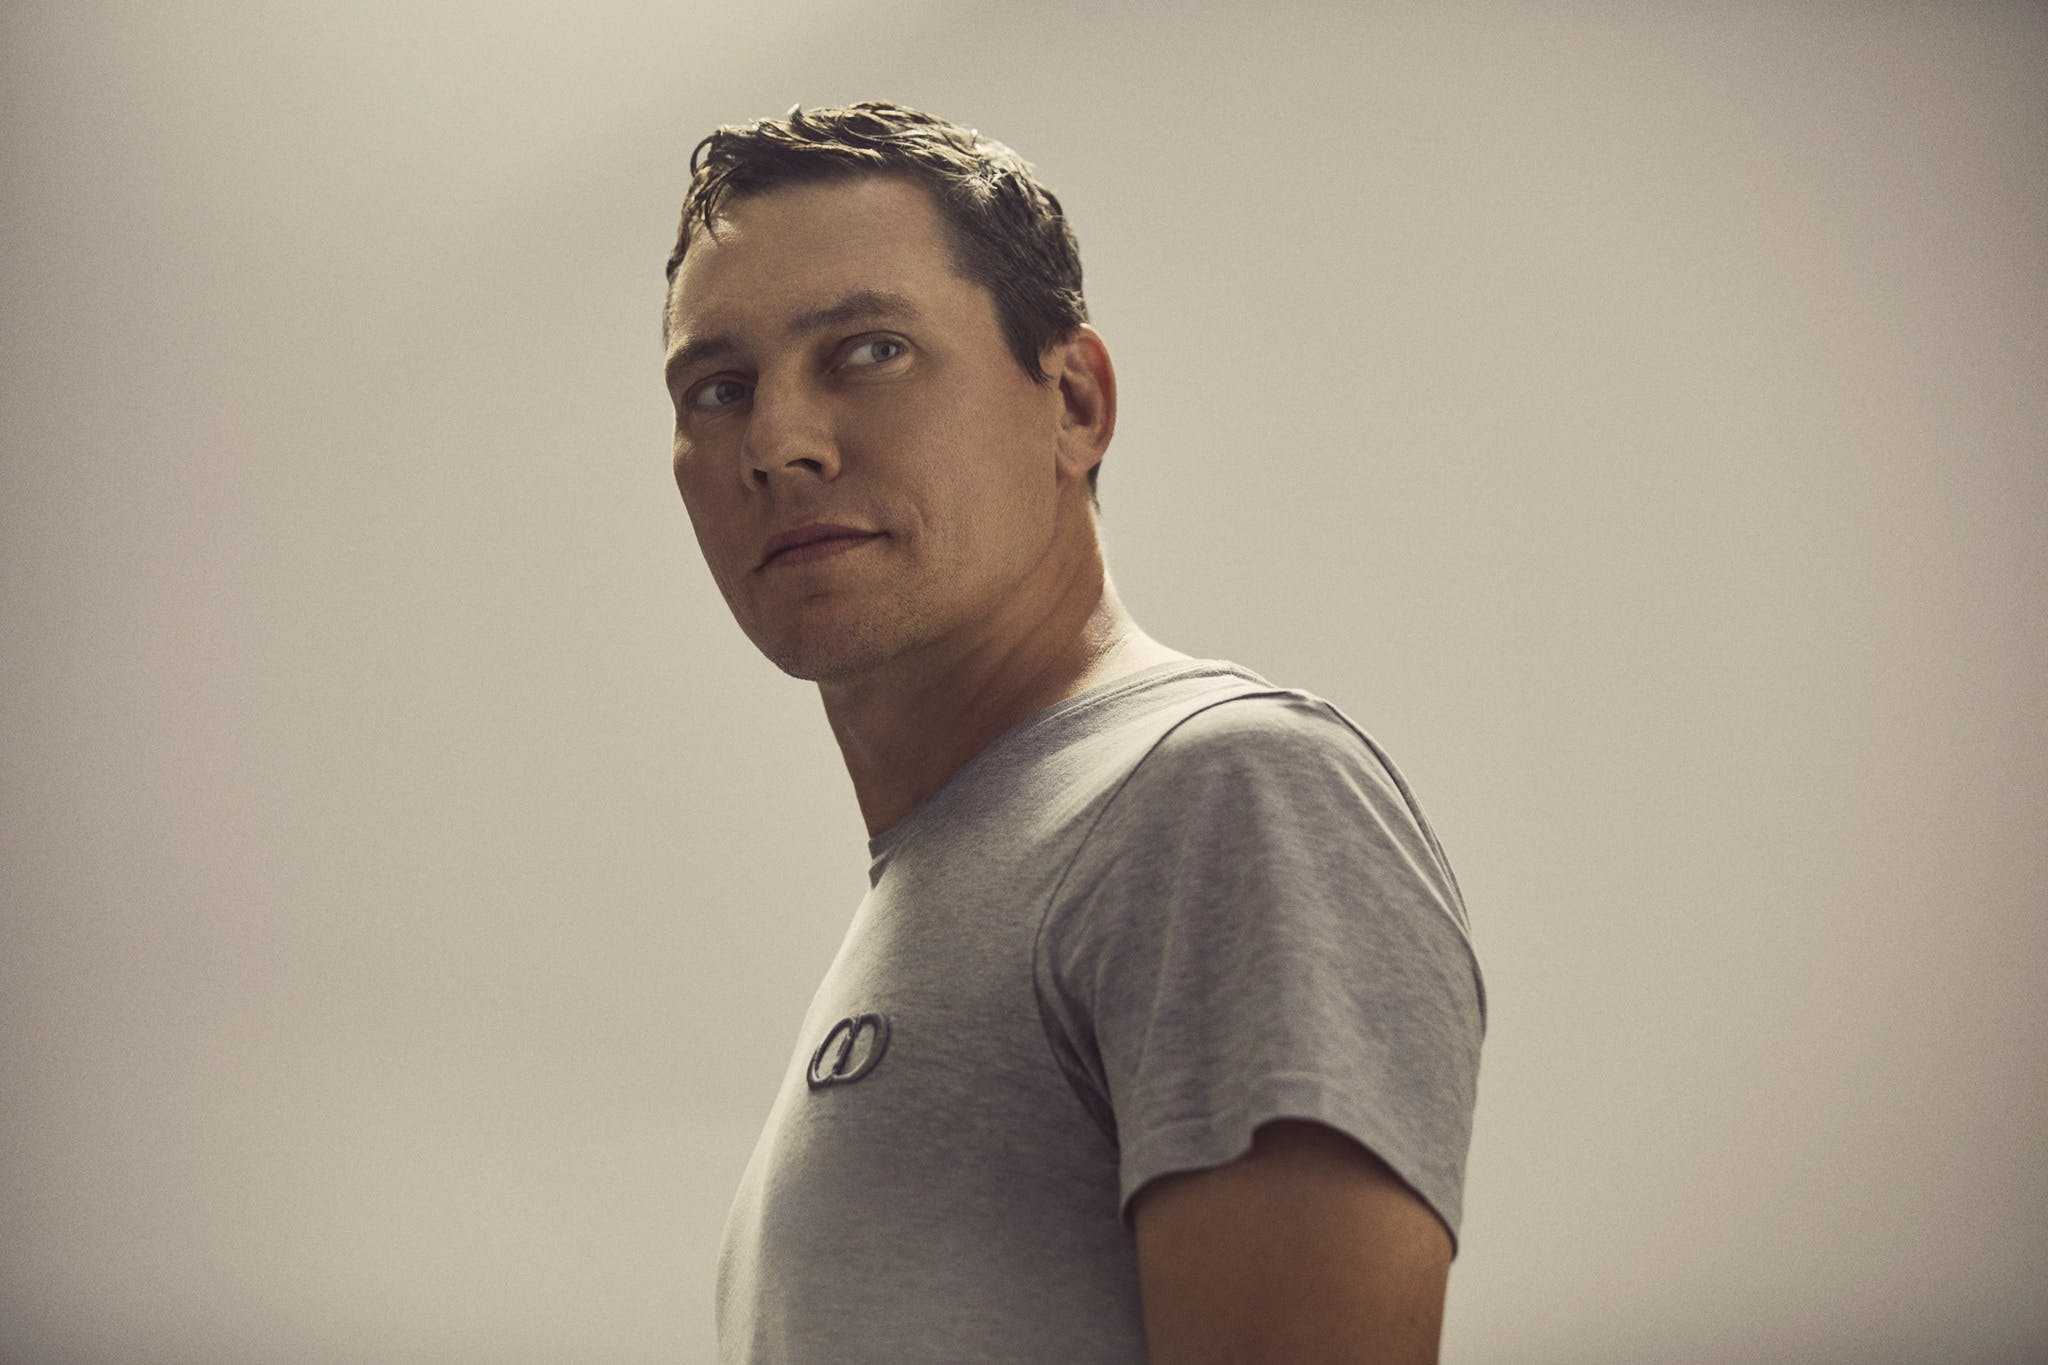 Tiësto & Mathame join forces for huge new track ‘Feel Your Ghost’: Listen